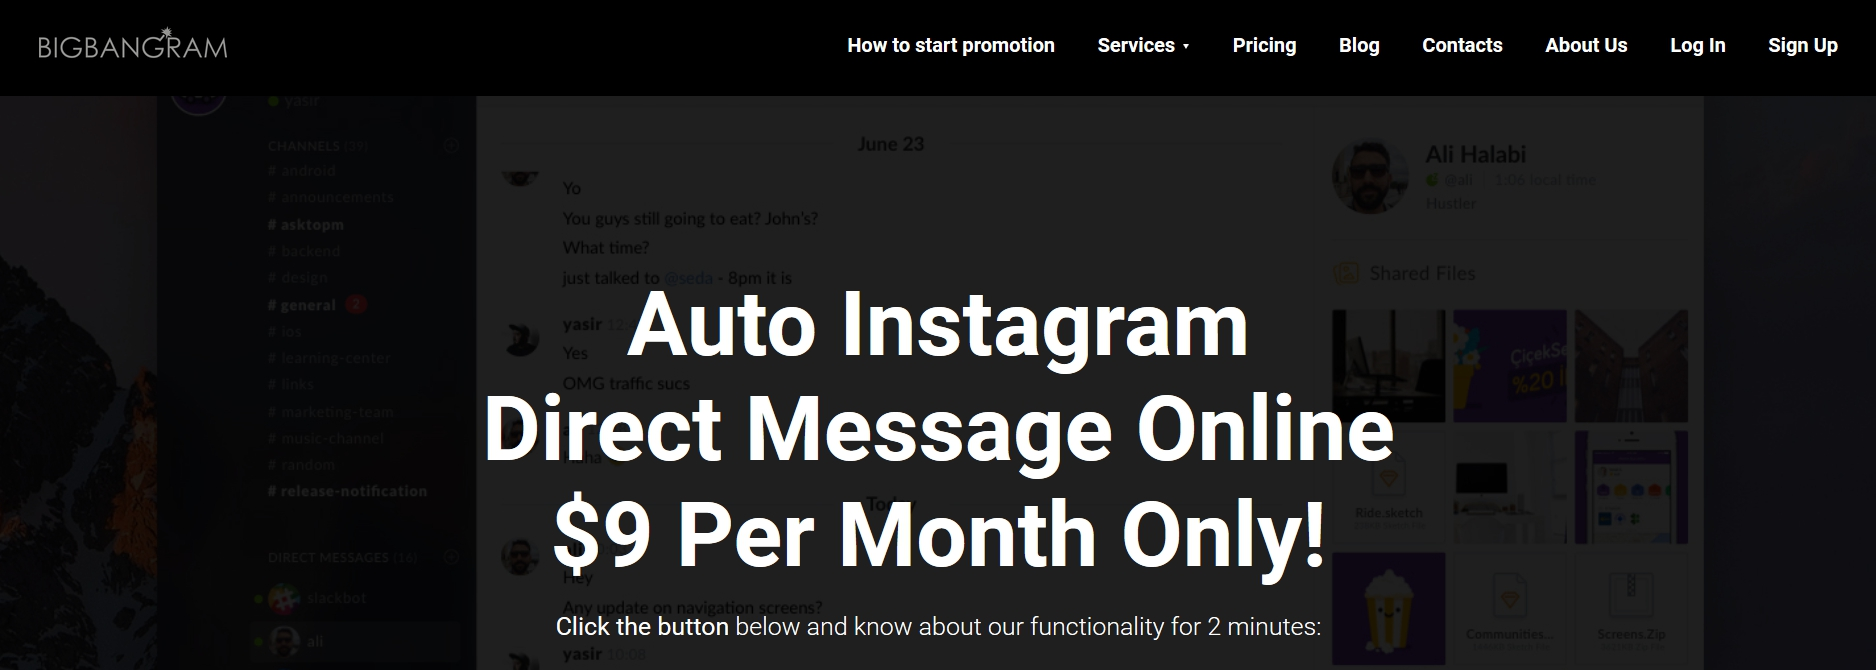 5 best online automation services with instagram direct message option 2019 - send direct message to all followers instagram